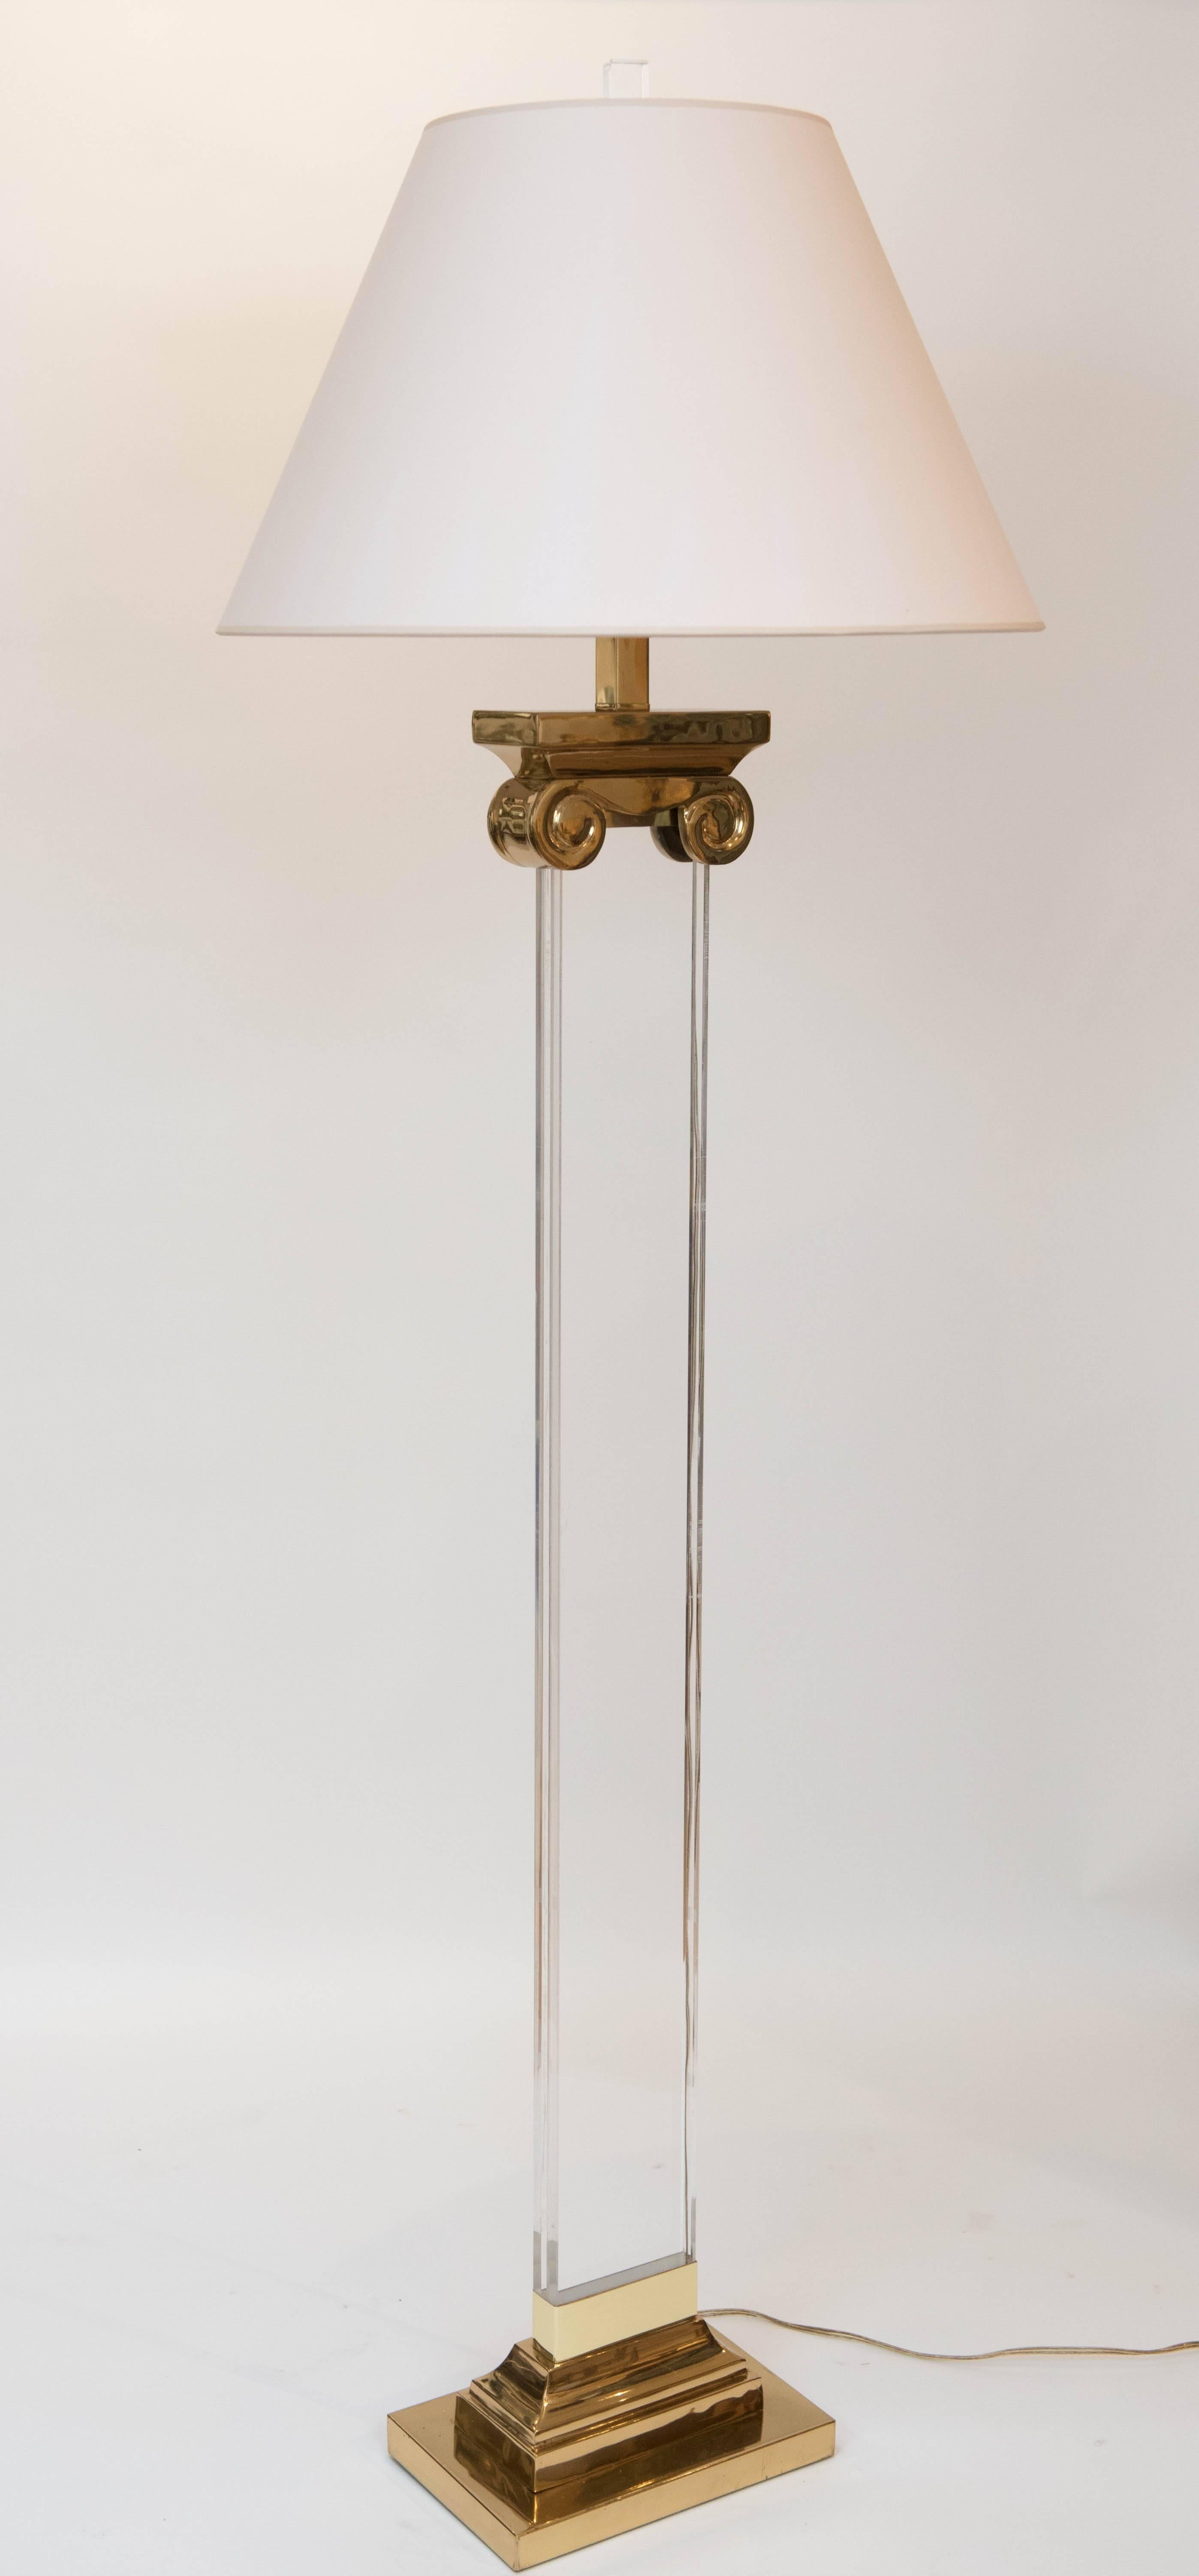 Molded Pair of Acrylic and Brass Neoclassical Column Floor Lamps